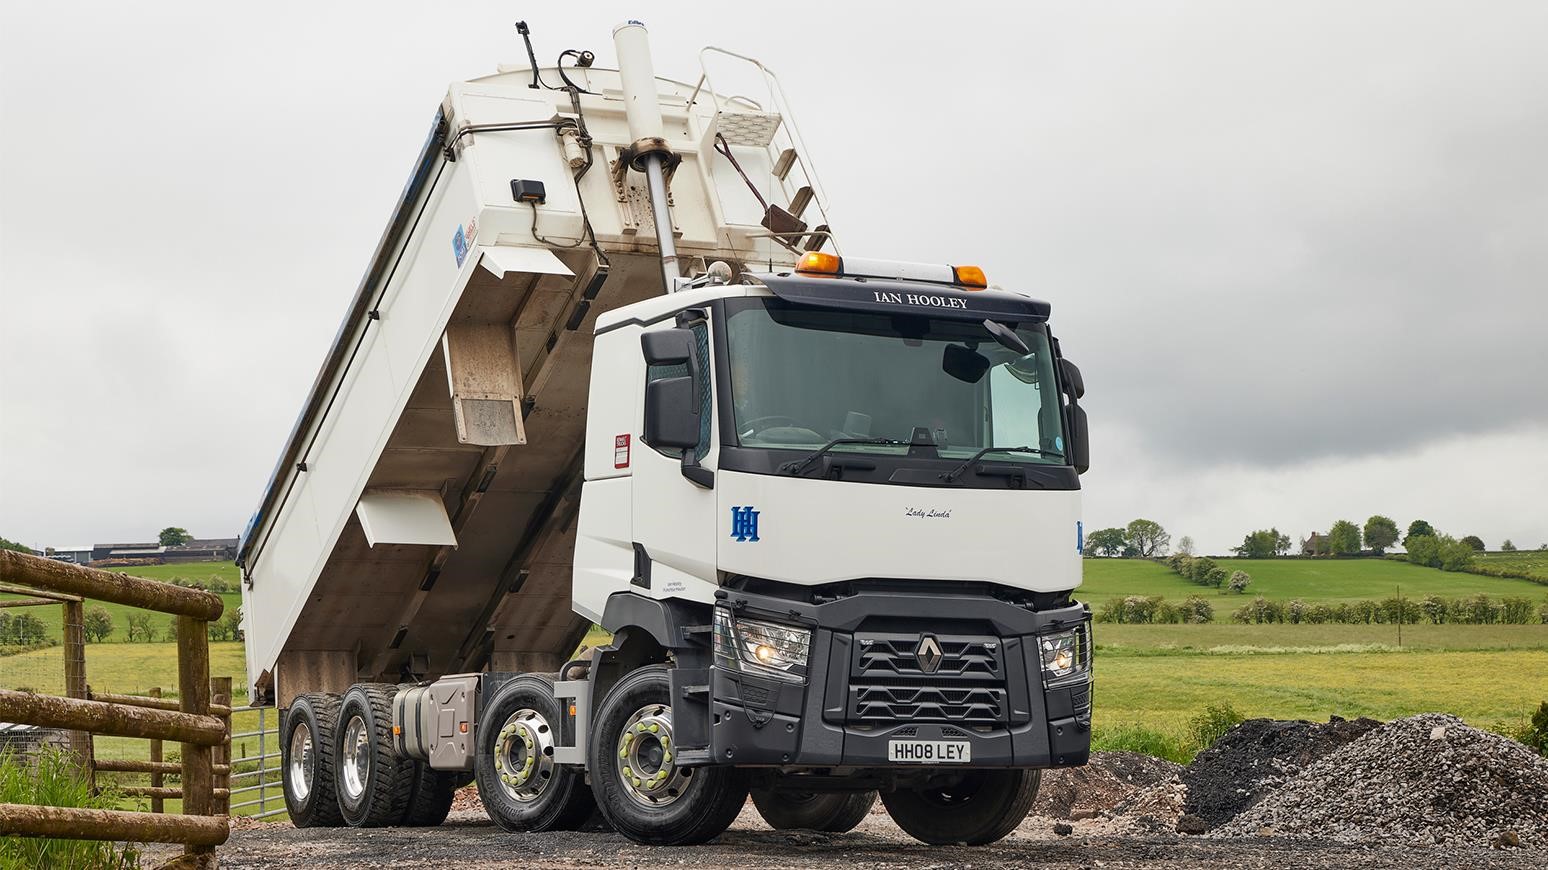 Ian Hooley Haulage Putting New Renault Trucks C480 Hauler To Work 24 Hours A Day